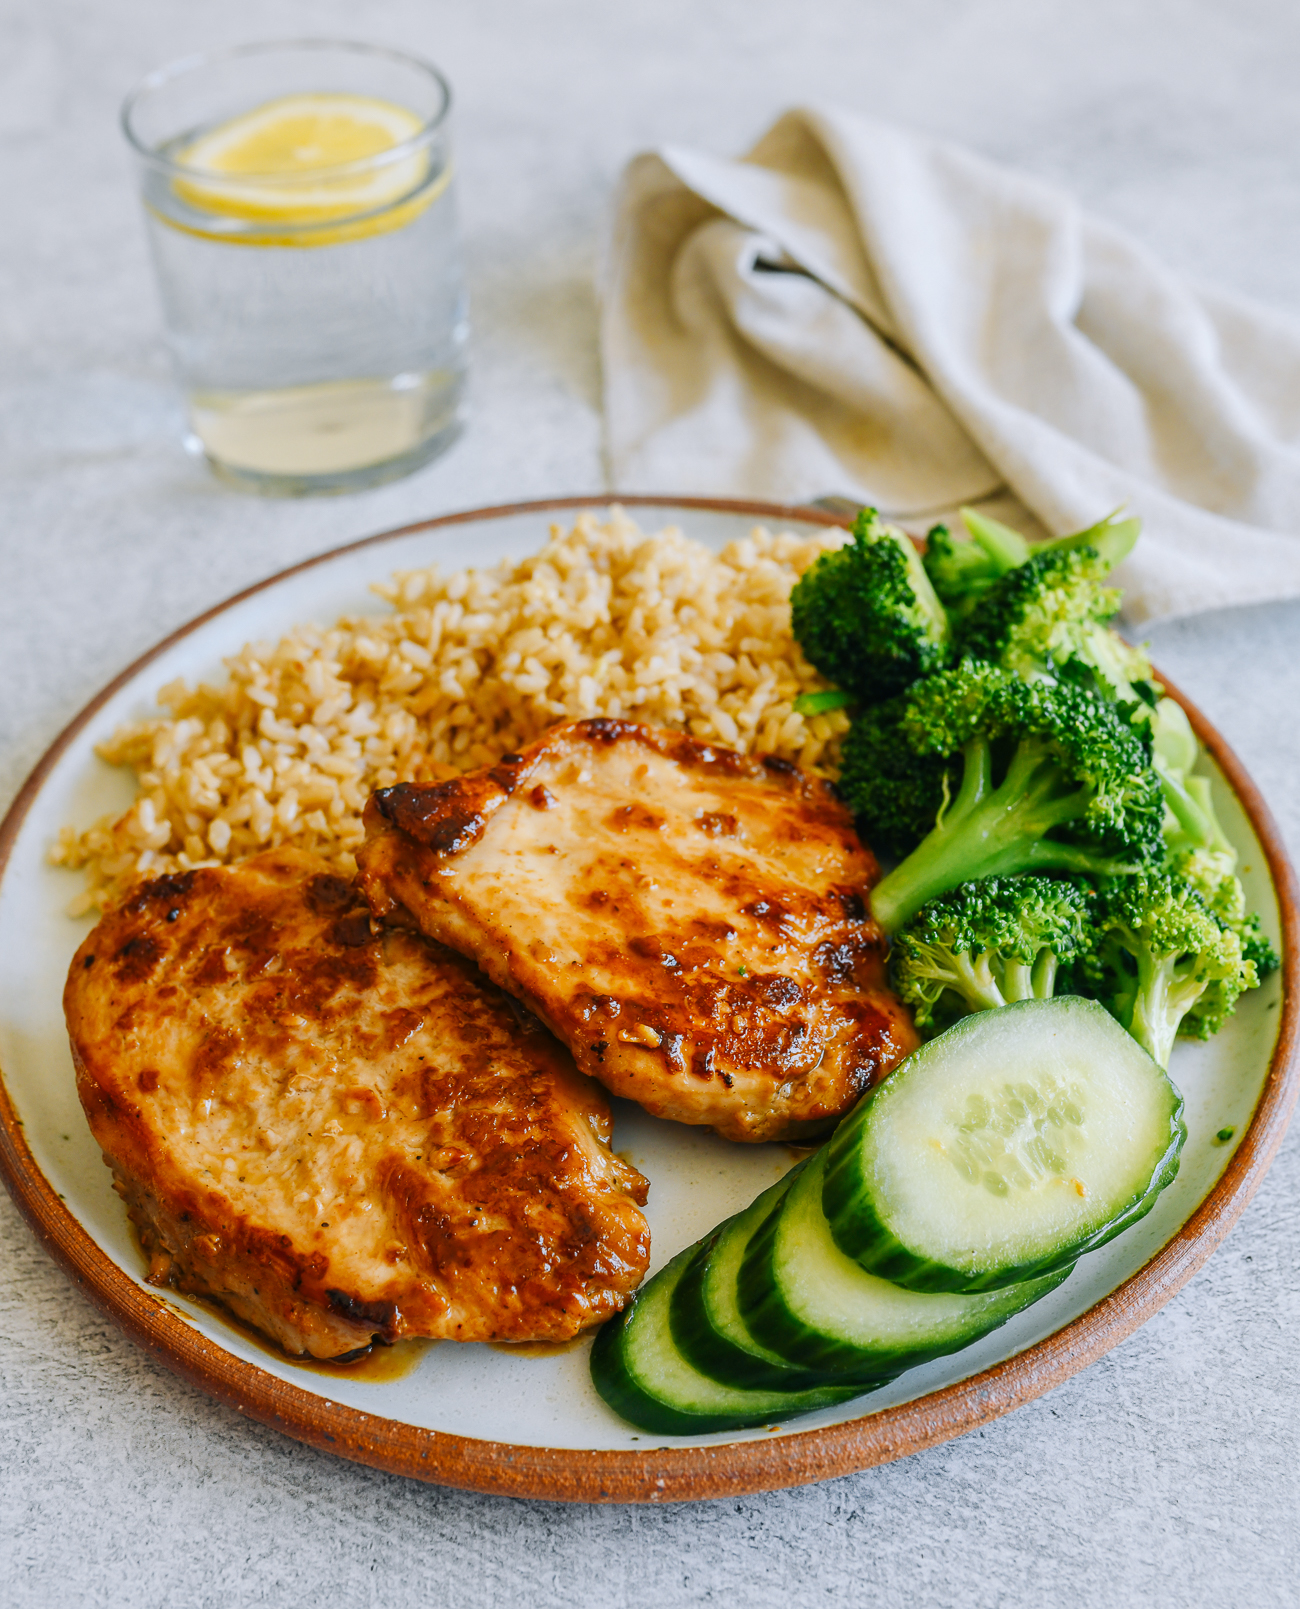 Pan-fried chicken breast with brown rice and broccoli